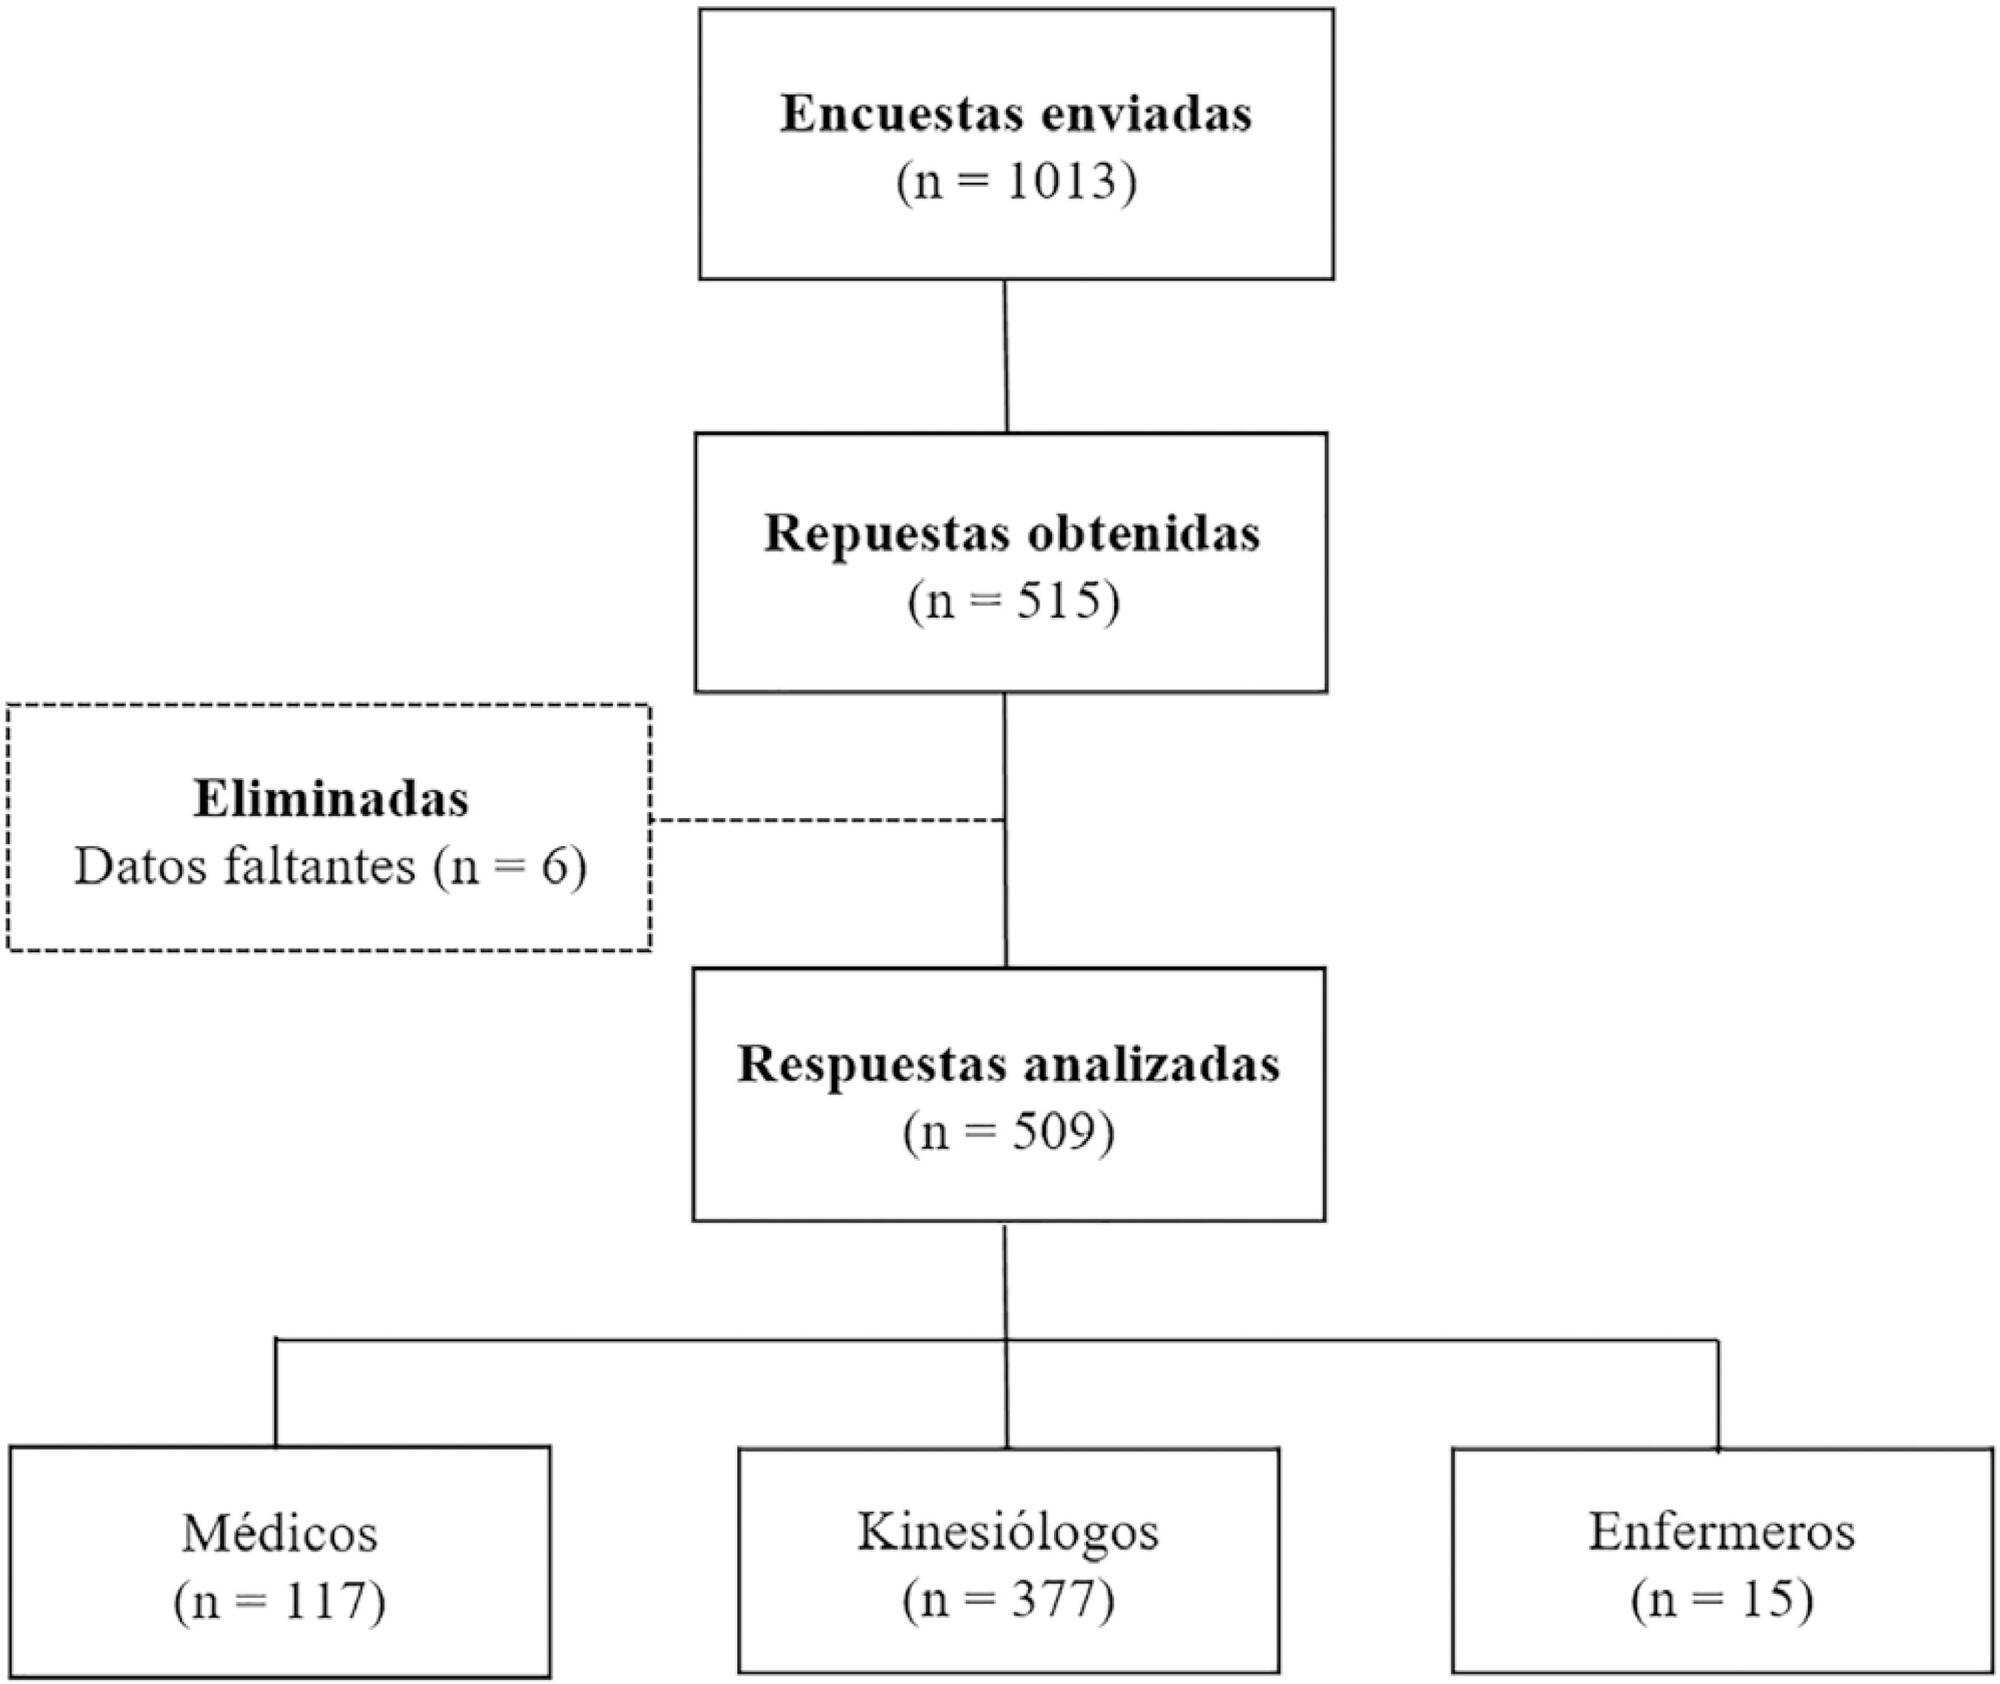 Titration and characteristics of pressure-support ventilation use in Argentina: an online cross-sectional survey study